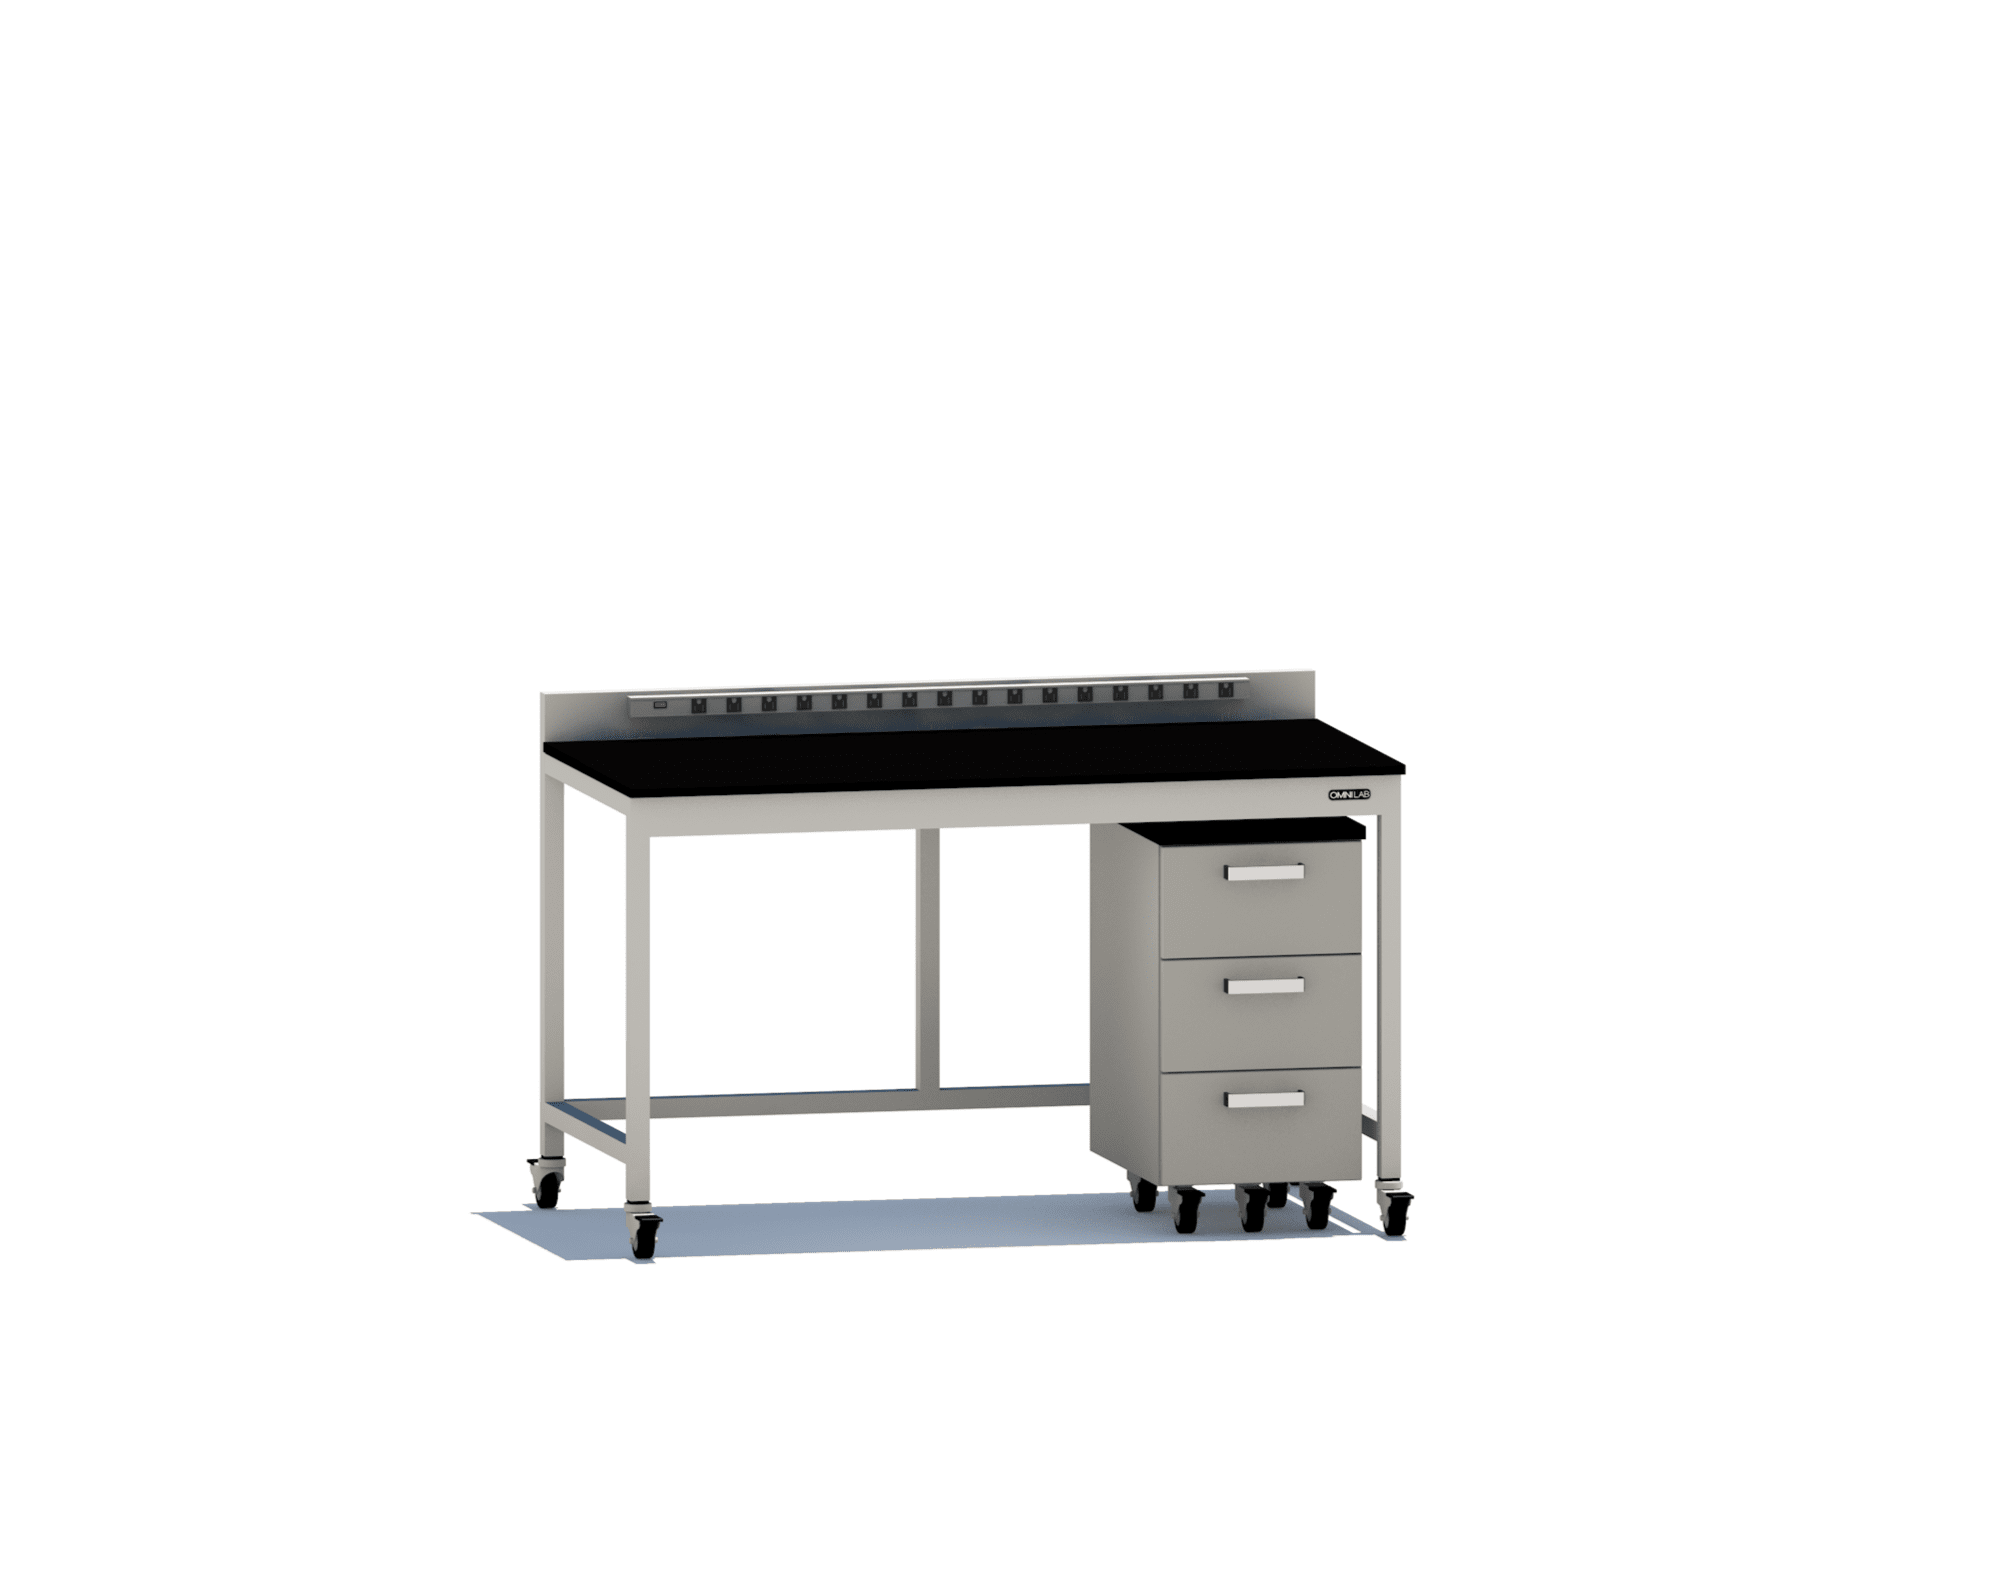 Complete Lab Table 2 - mobile Lab Tables OMNI Lab Solutions 60" wide Mobile 